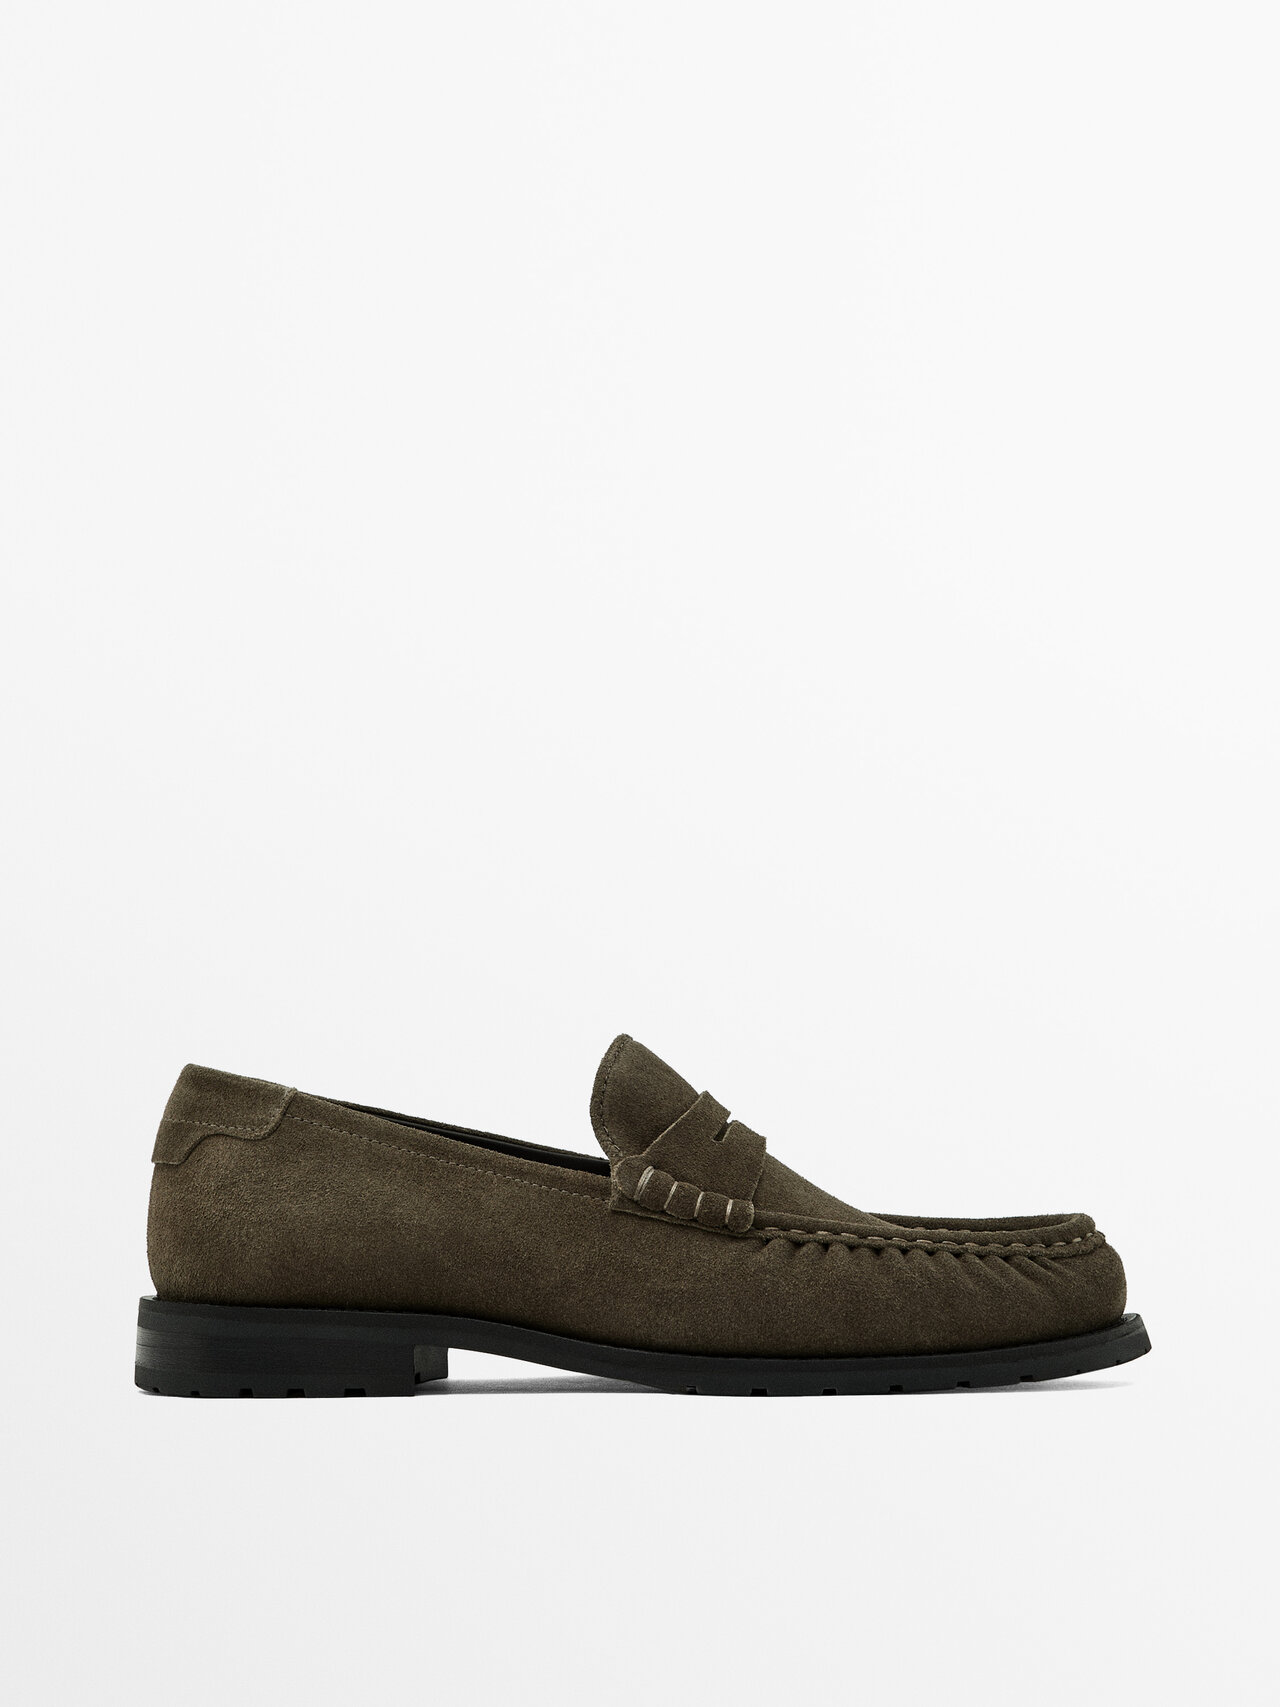 Massimo Dutti Split Suede Leather Loafers In Mink